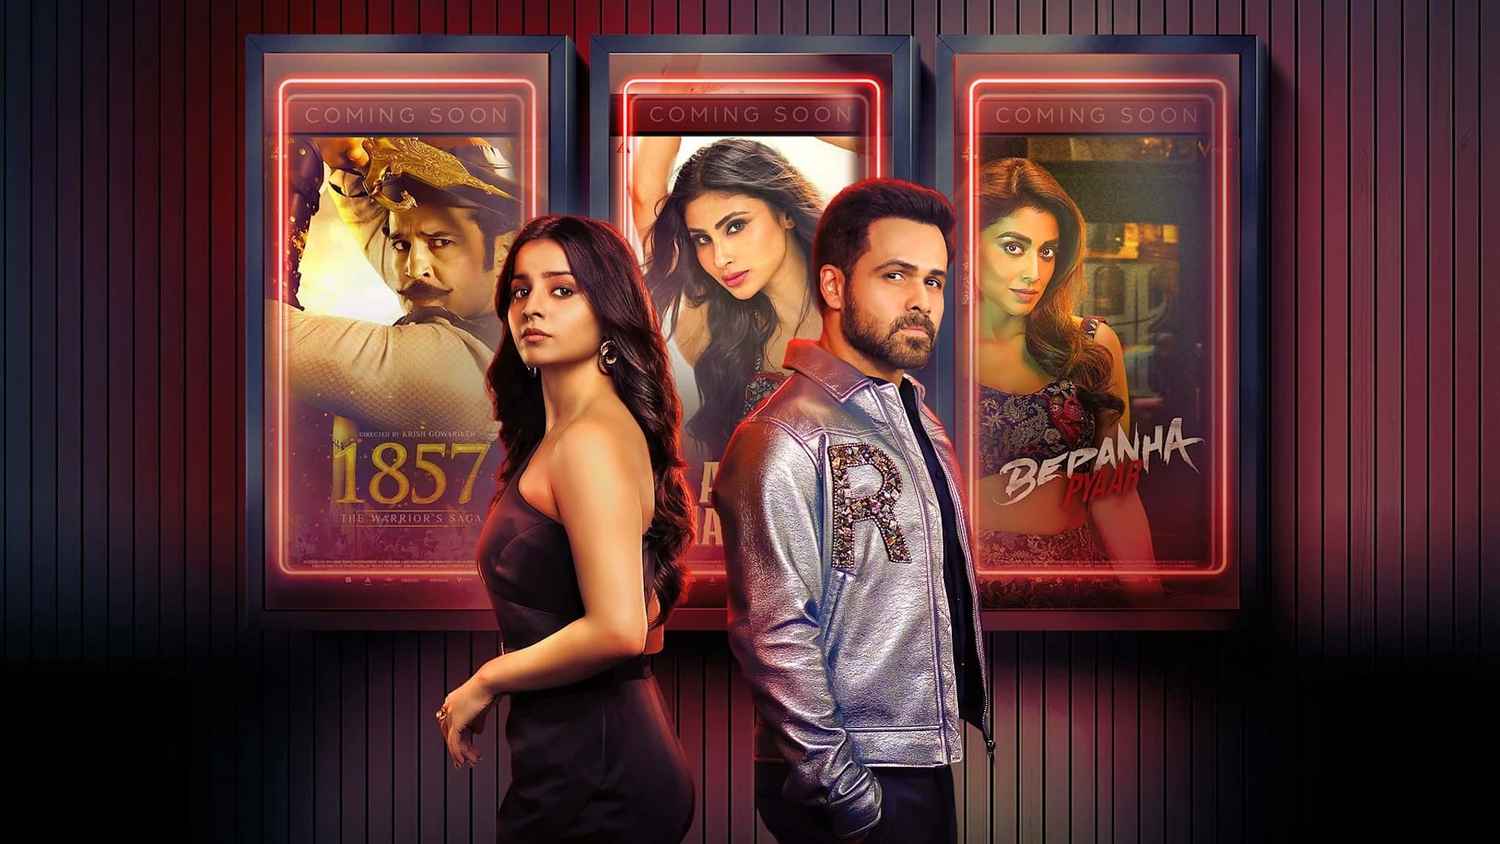 Royal Movies To Watch: 10 movies you should watch if you love Royal Drama |  Times of India